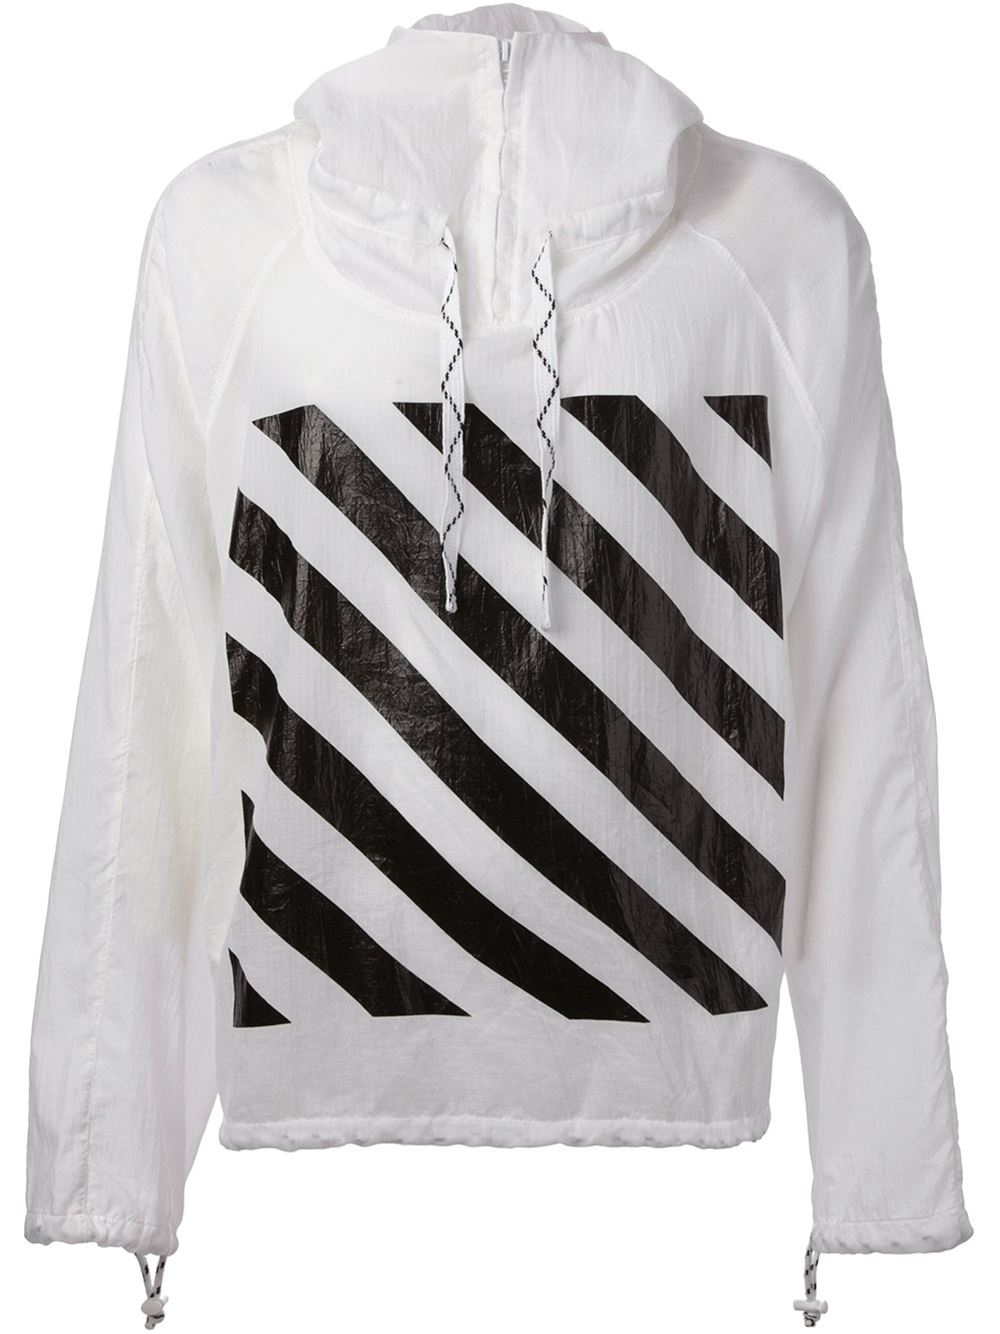 Lyst - Off-White c/o Virgil Abloh Front And Rear Printed Hoodie in White for Men